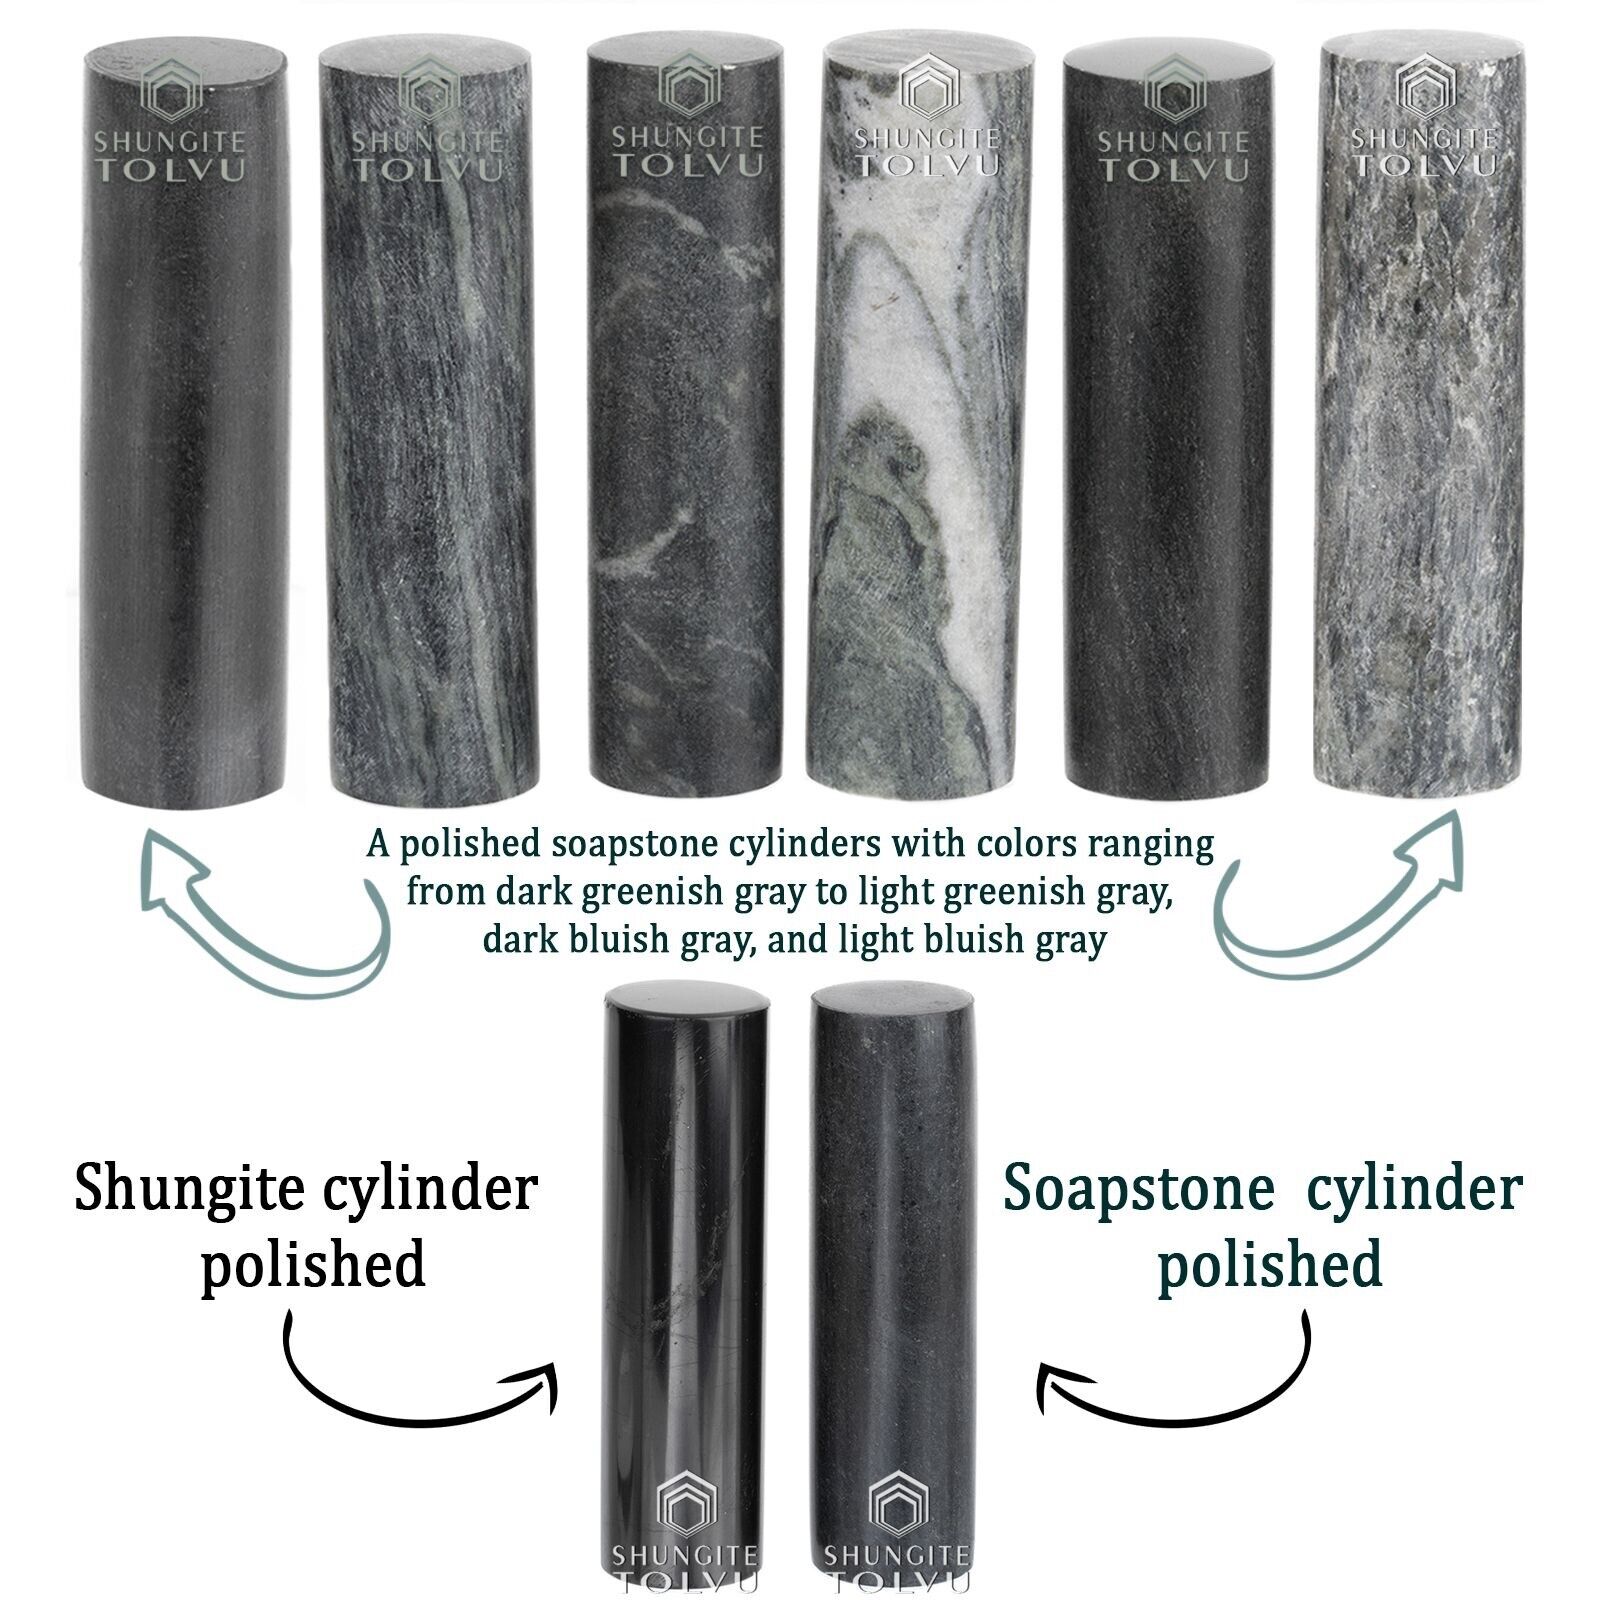 Shungite and Soapstone Harmonizers Set of 2 Natural Authentic Cylinders, Tolvu